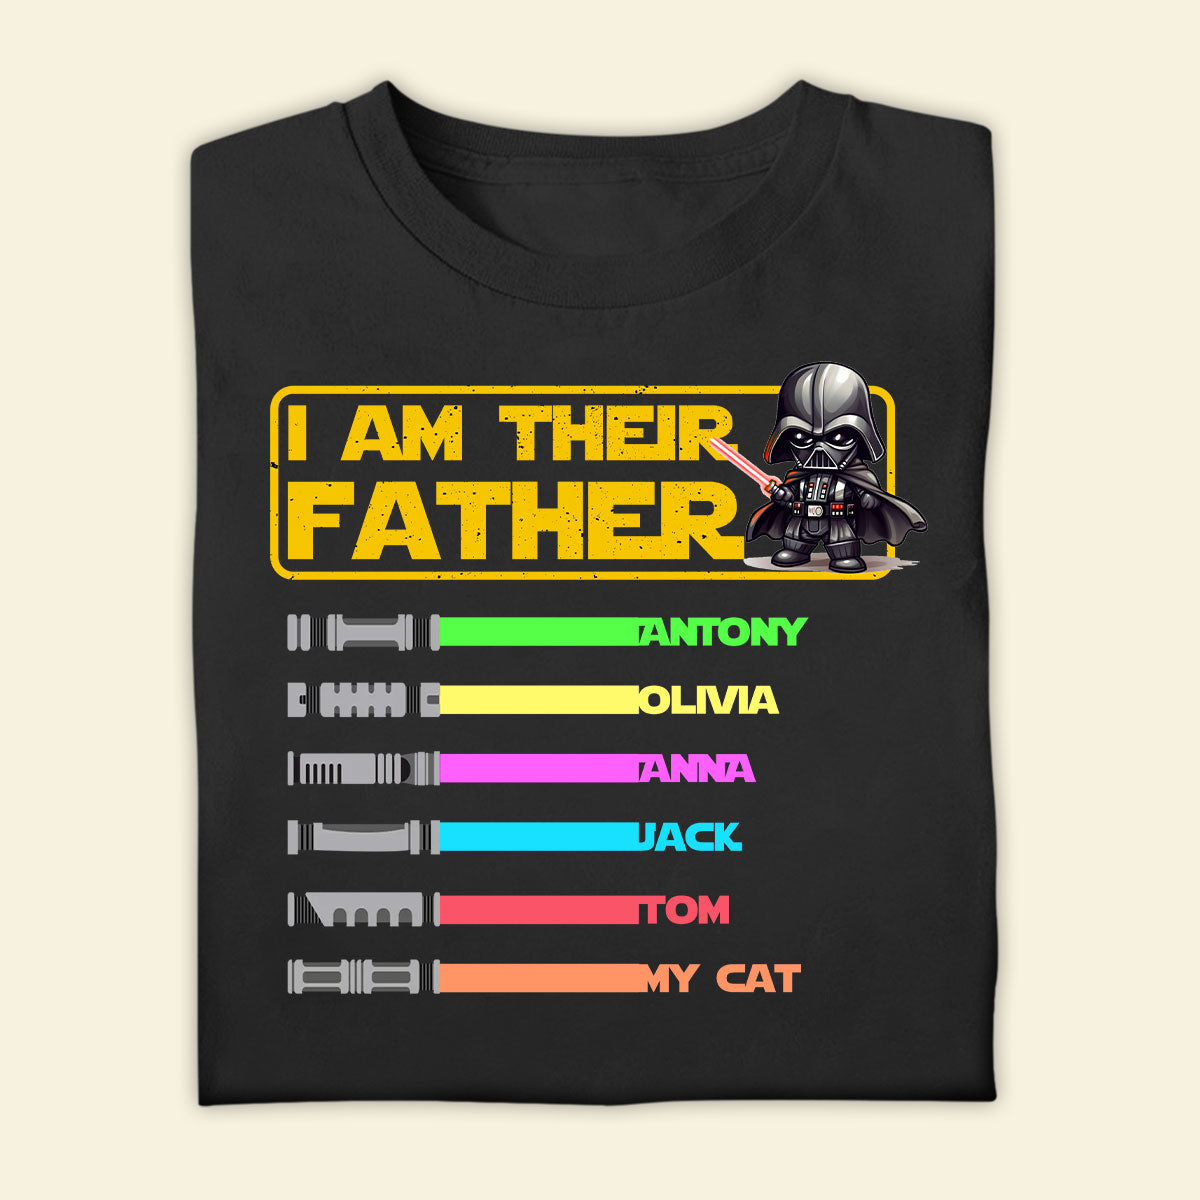 Personalized T-Shirt For Dad - I Am Their Father - Dad - Daddy - Papa - Customized Apparel Gifts For Father's Day Birthday Anniversary T-Shirt For Dad